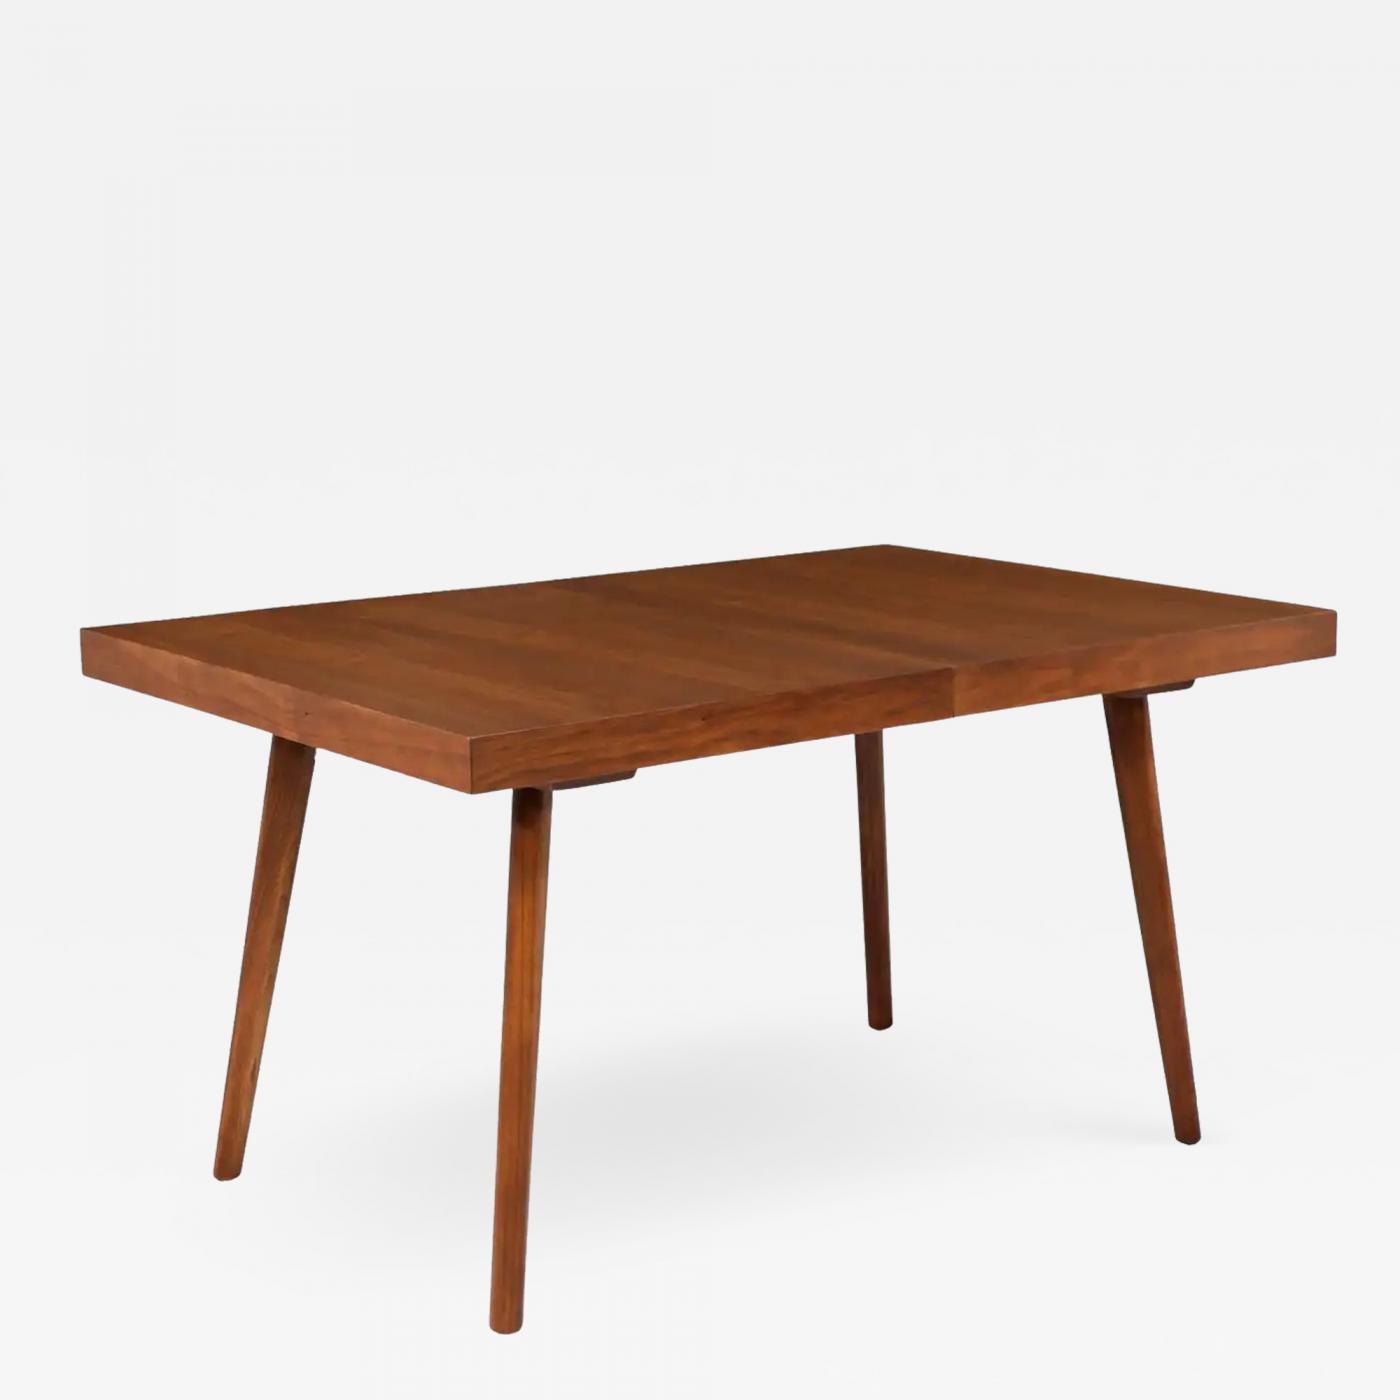 https://cdn.incollect.com/sites/default/files/zoom/Stanley-Young-Stanley-Young-Expanding-Walnut-Dining-Table-for-Glenn-of-California-544336-2507128.jpg